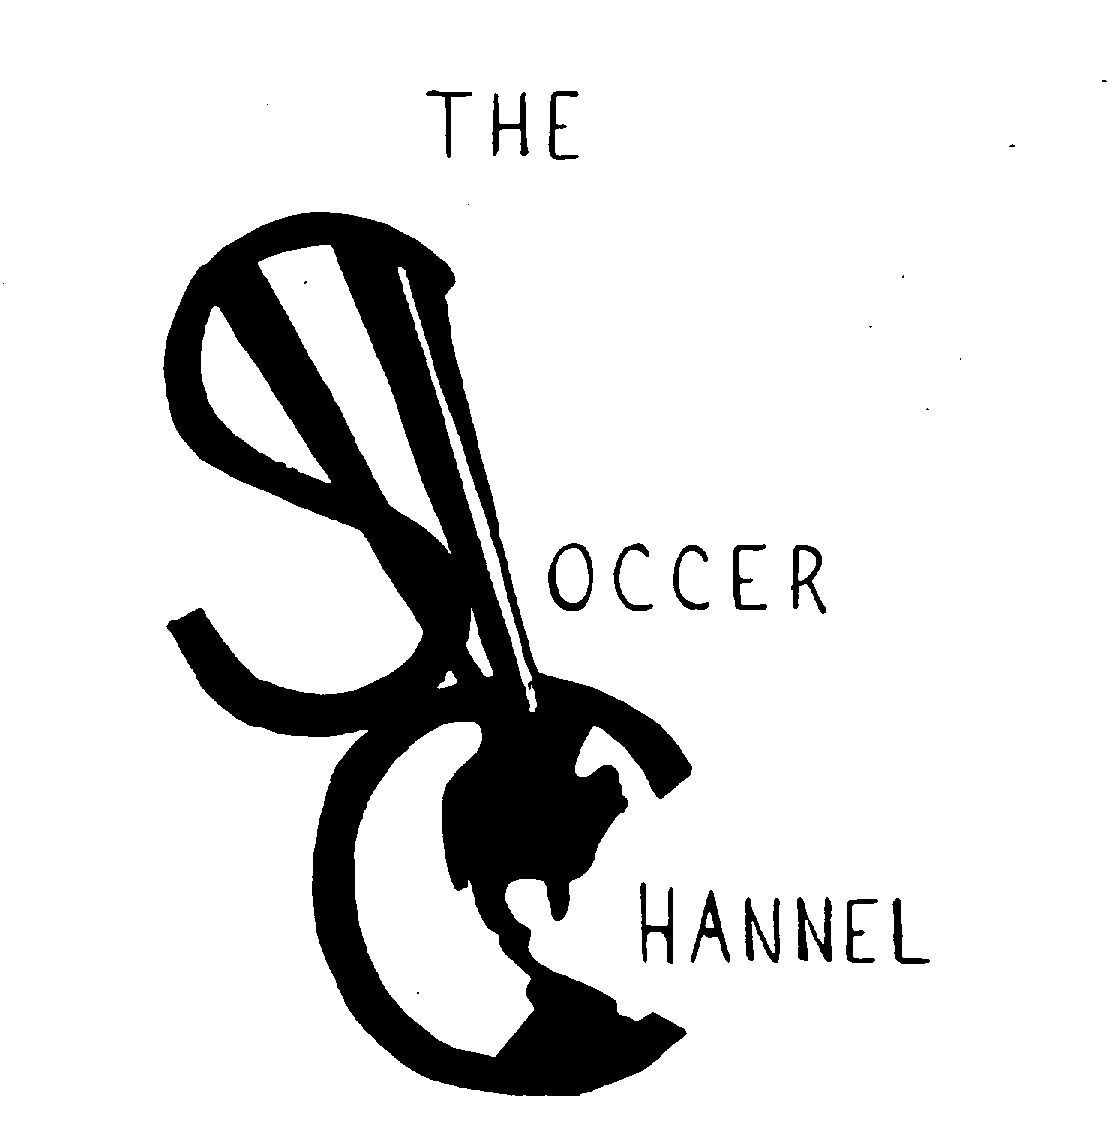  THE SOCCER CHANNEL